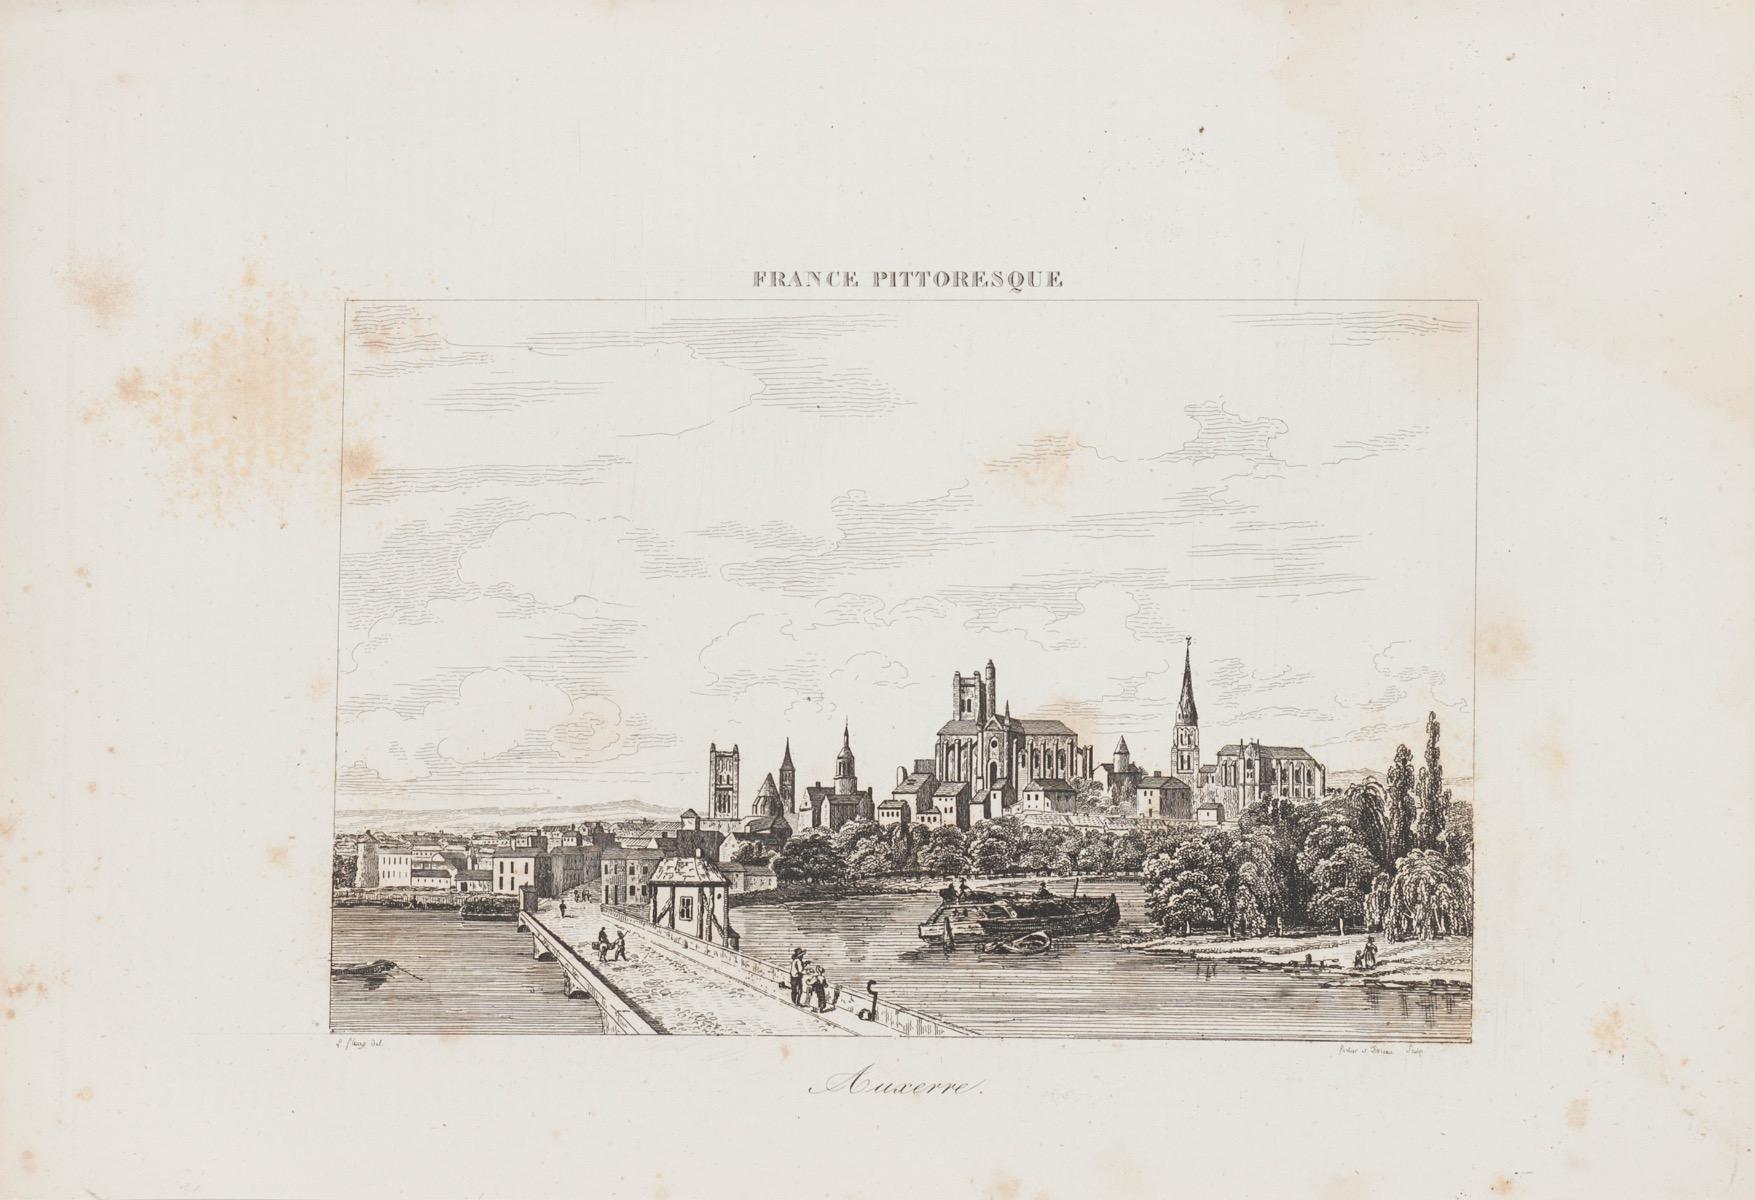 Unknown Figurative Print - View of Auxerre - Lithograph - 19th Century